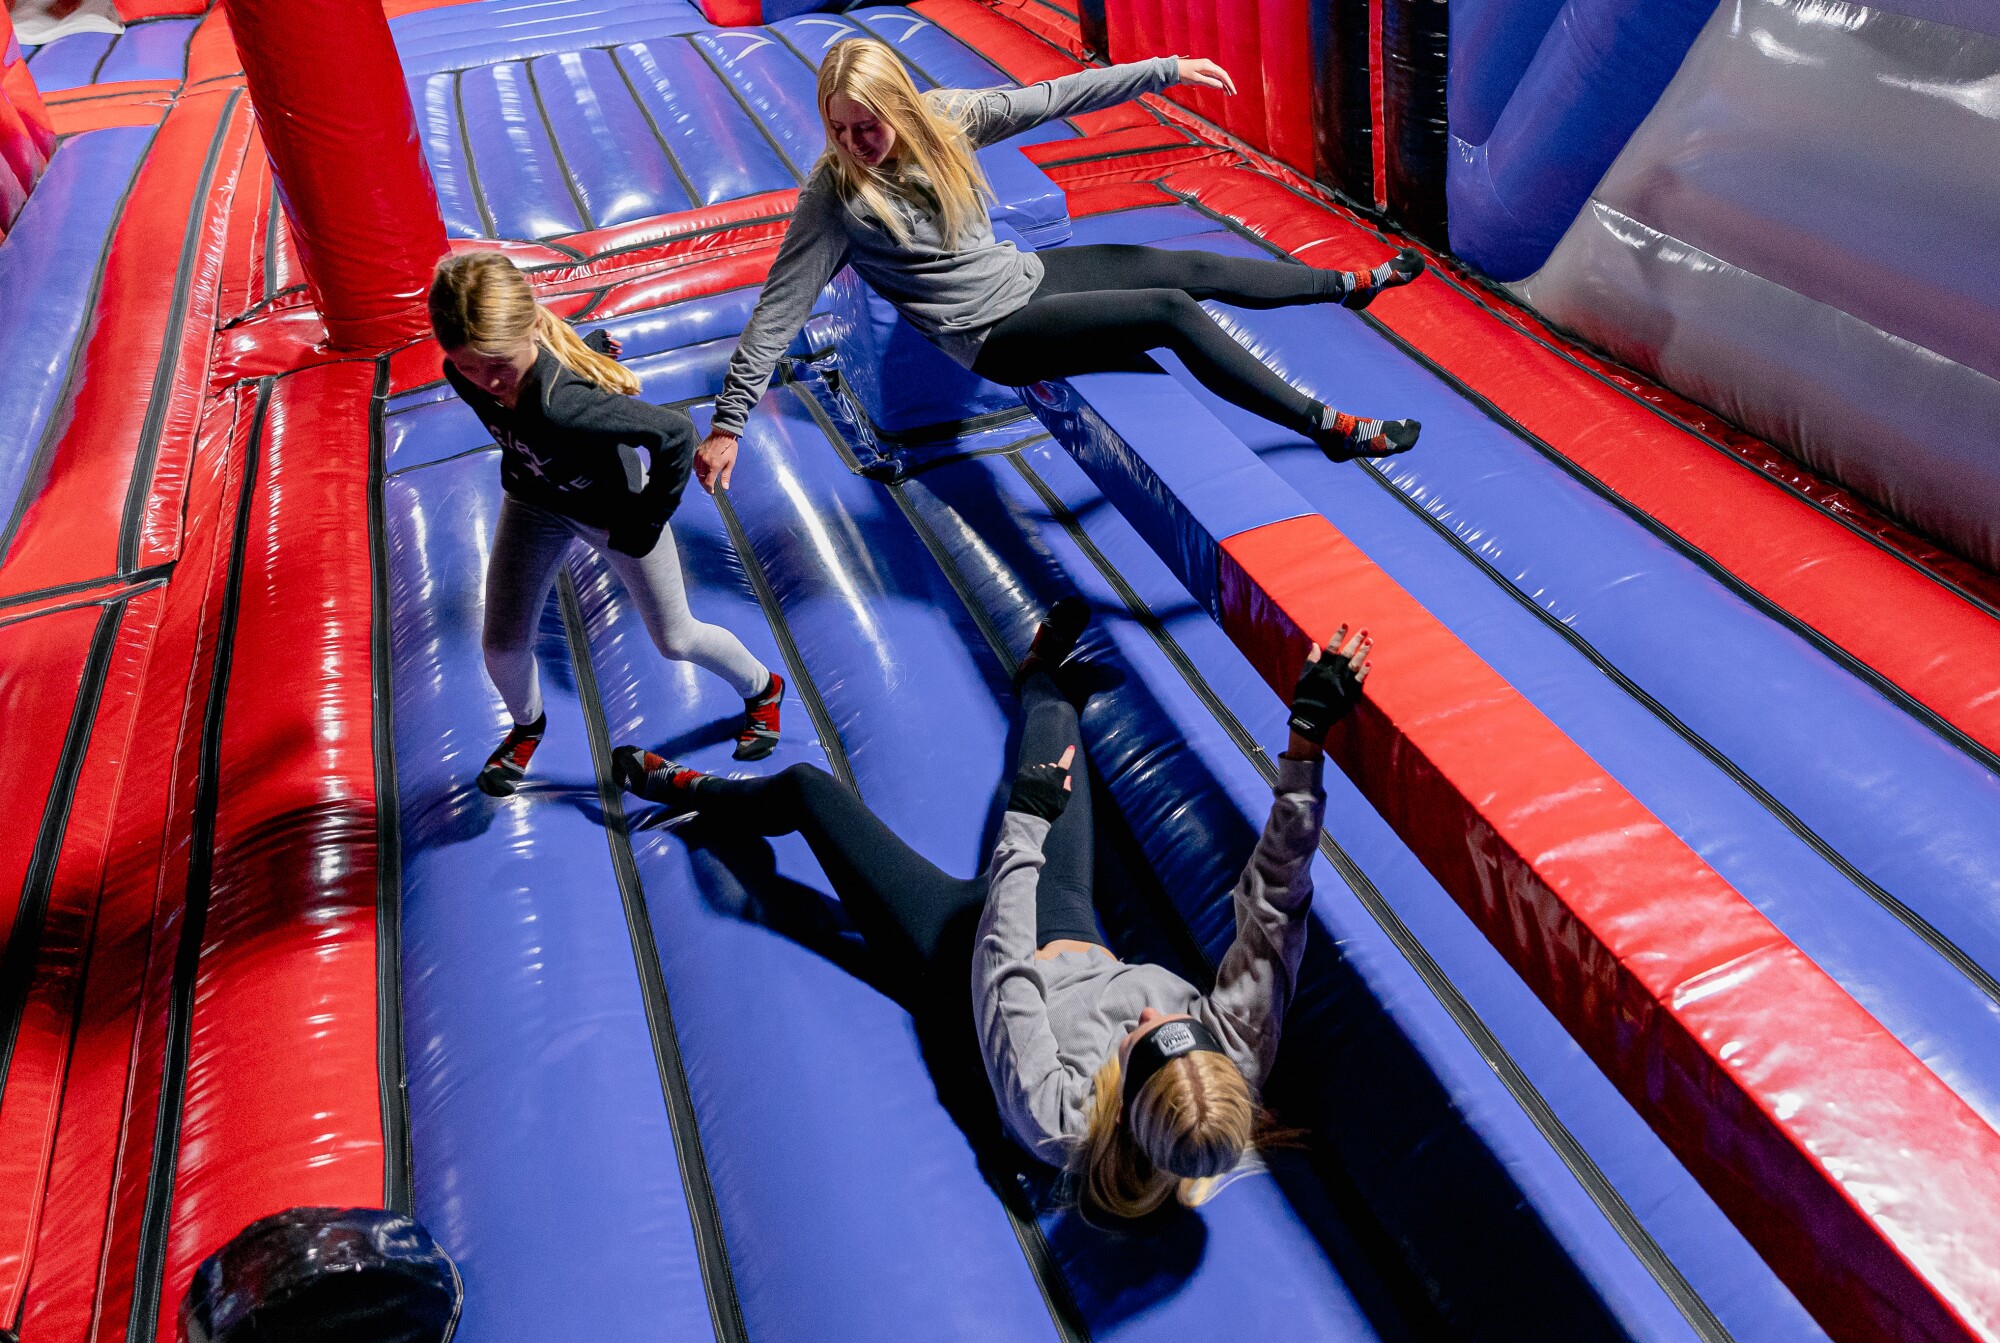 Three girls play on an inflatable obstacle course.